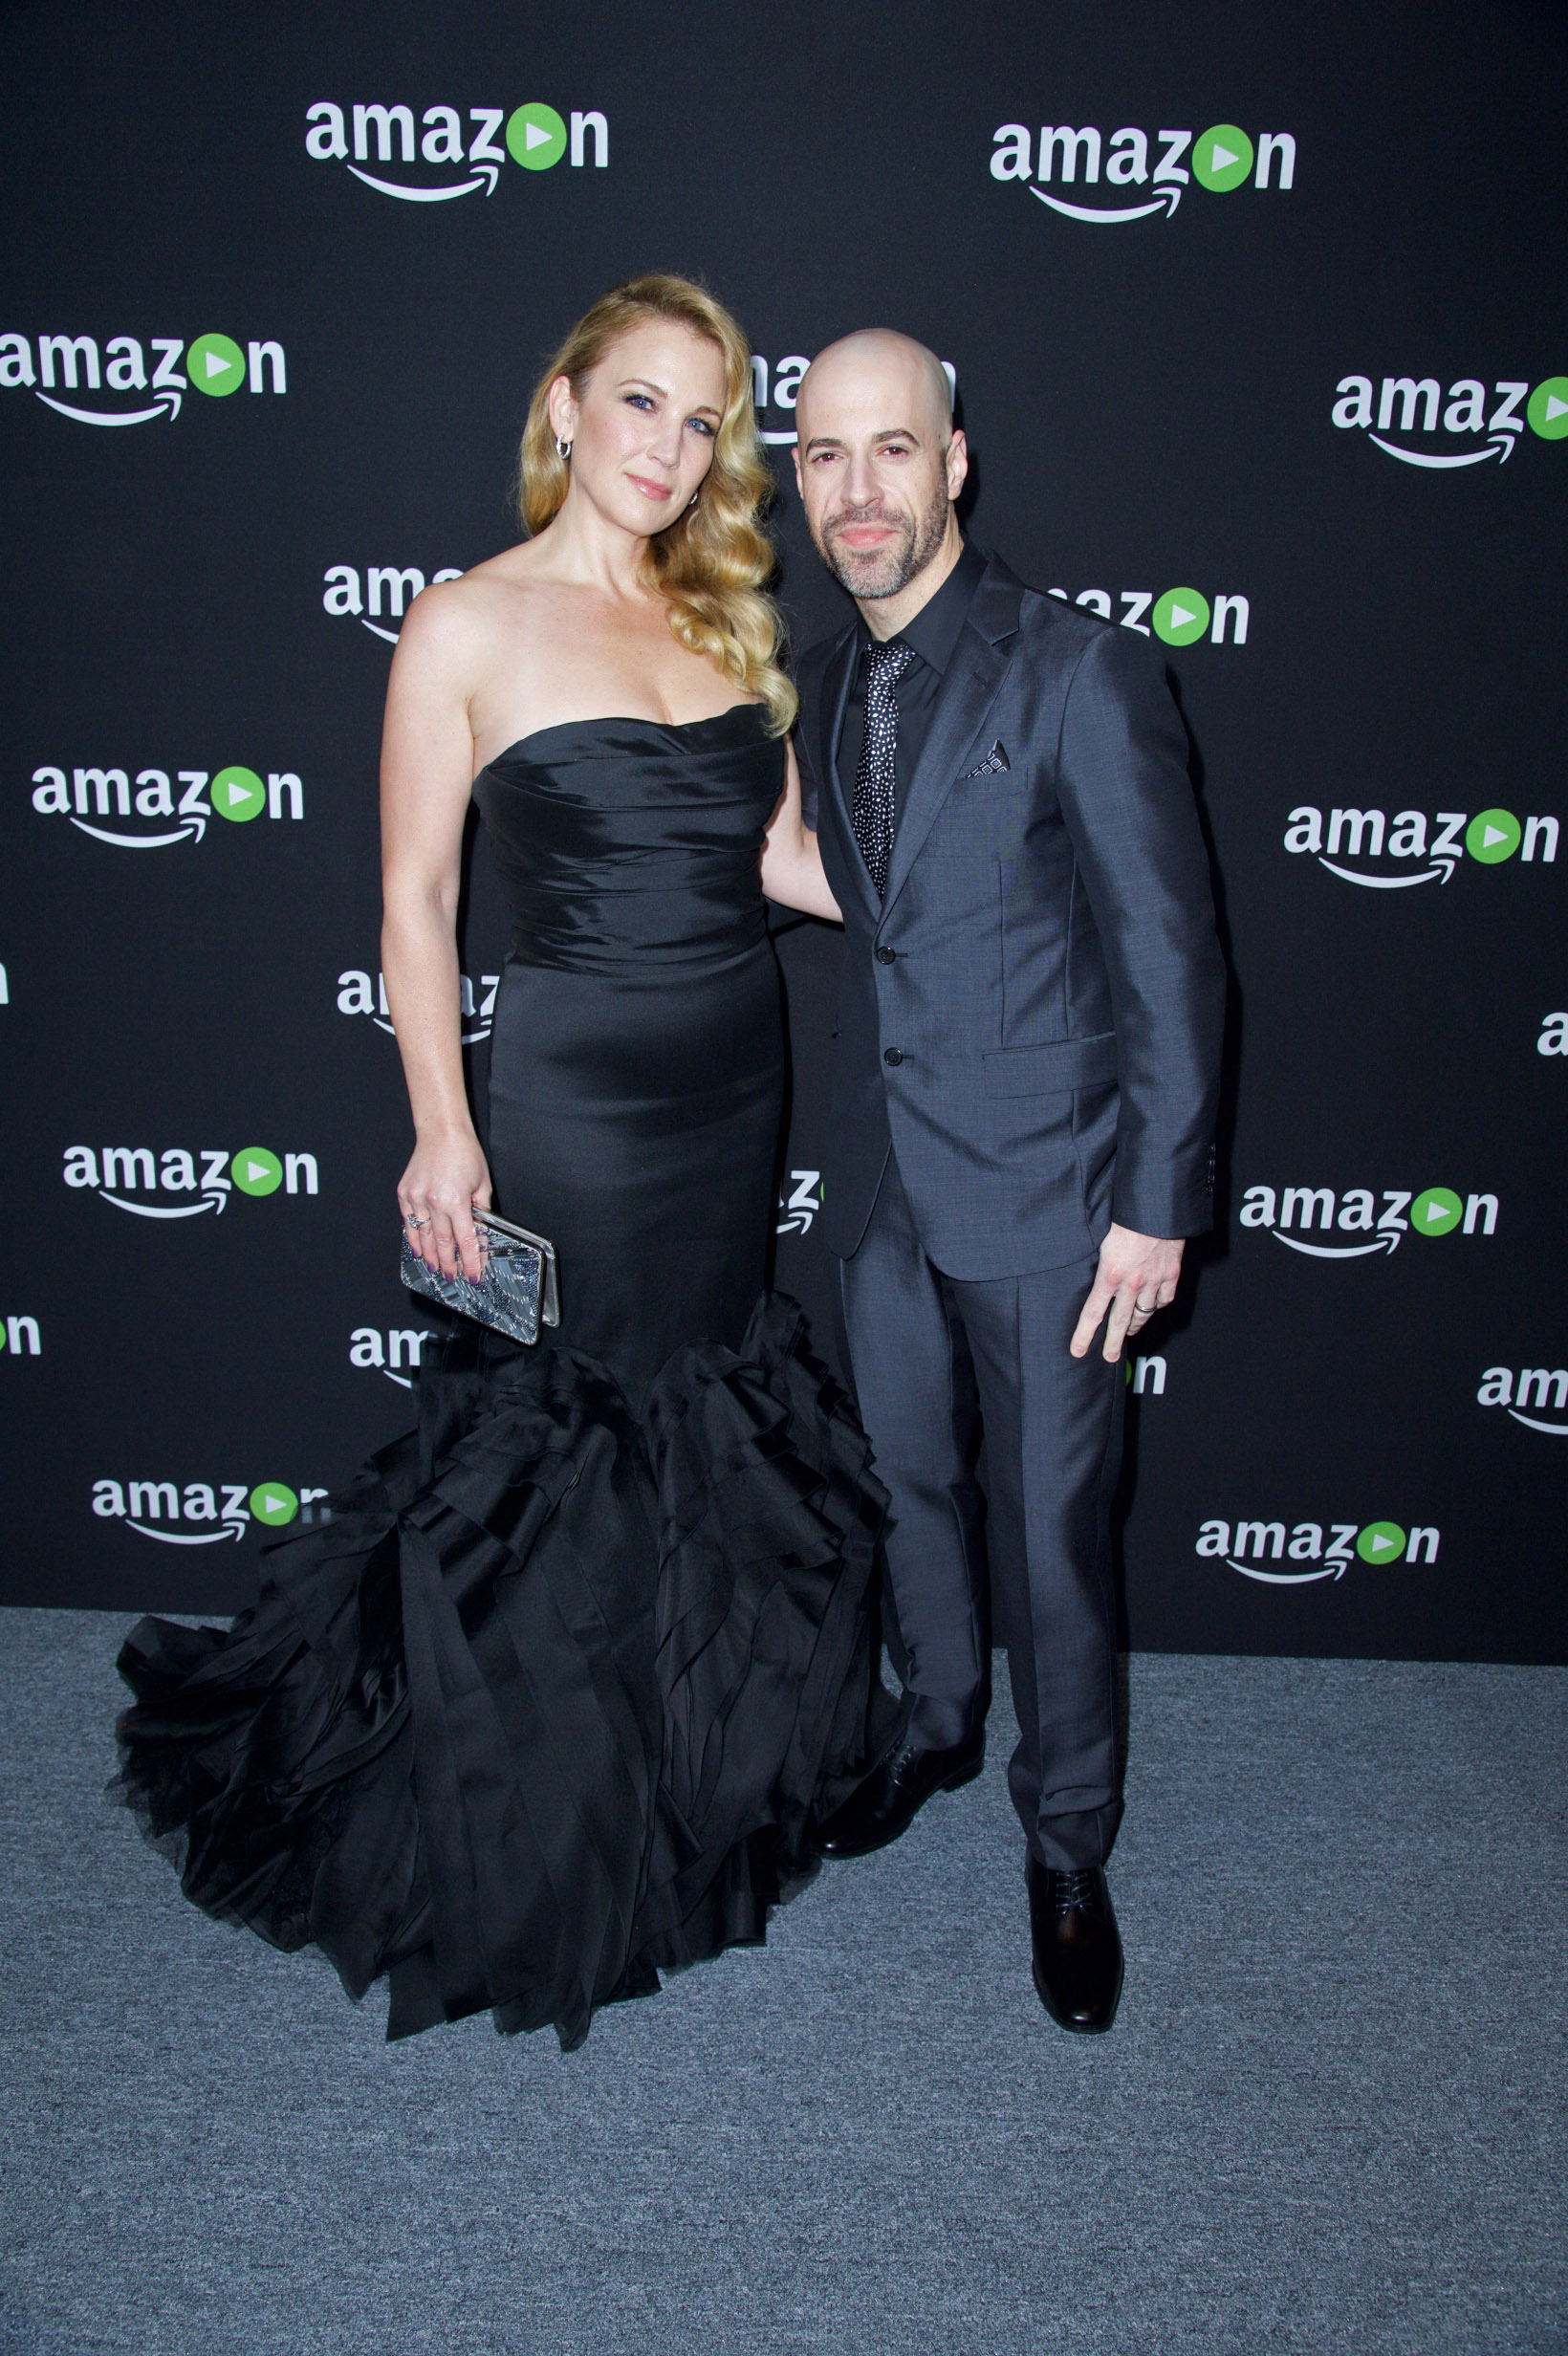 PHOTO: Deanna Daughtry and Chris Daughtry attend Amazon Studios Golden Globes Party on Jan. 10, 2016 in Beverly Hills, Calif.